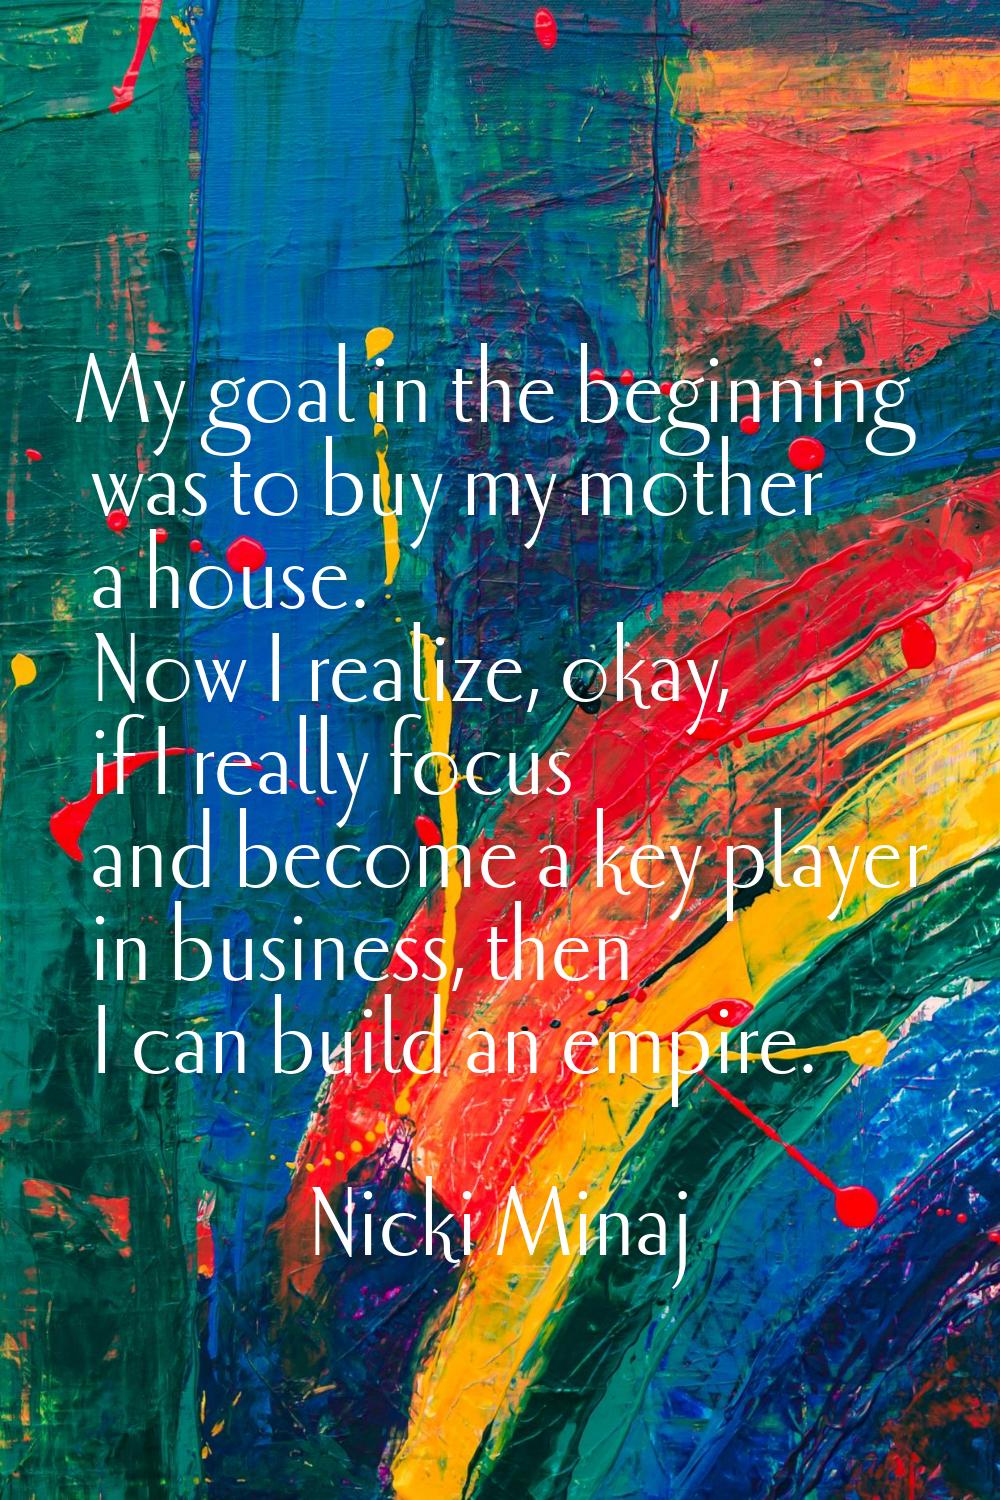 My goal in the beginning was to buy my mother a house. Now I realize, okay, if I really focus and b